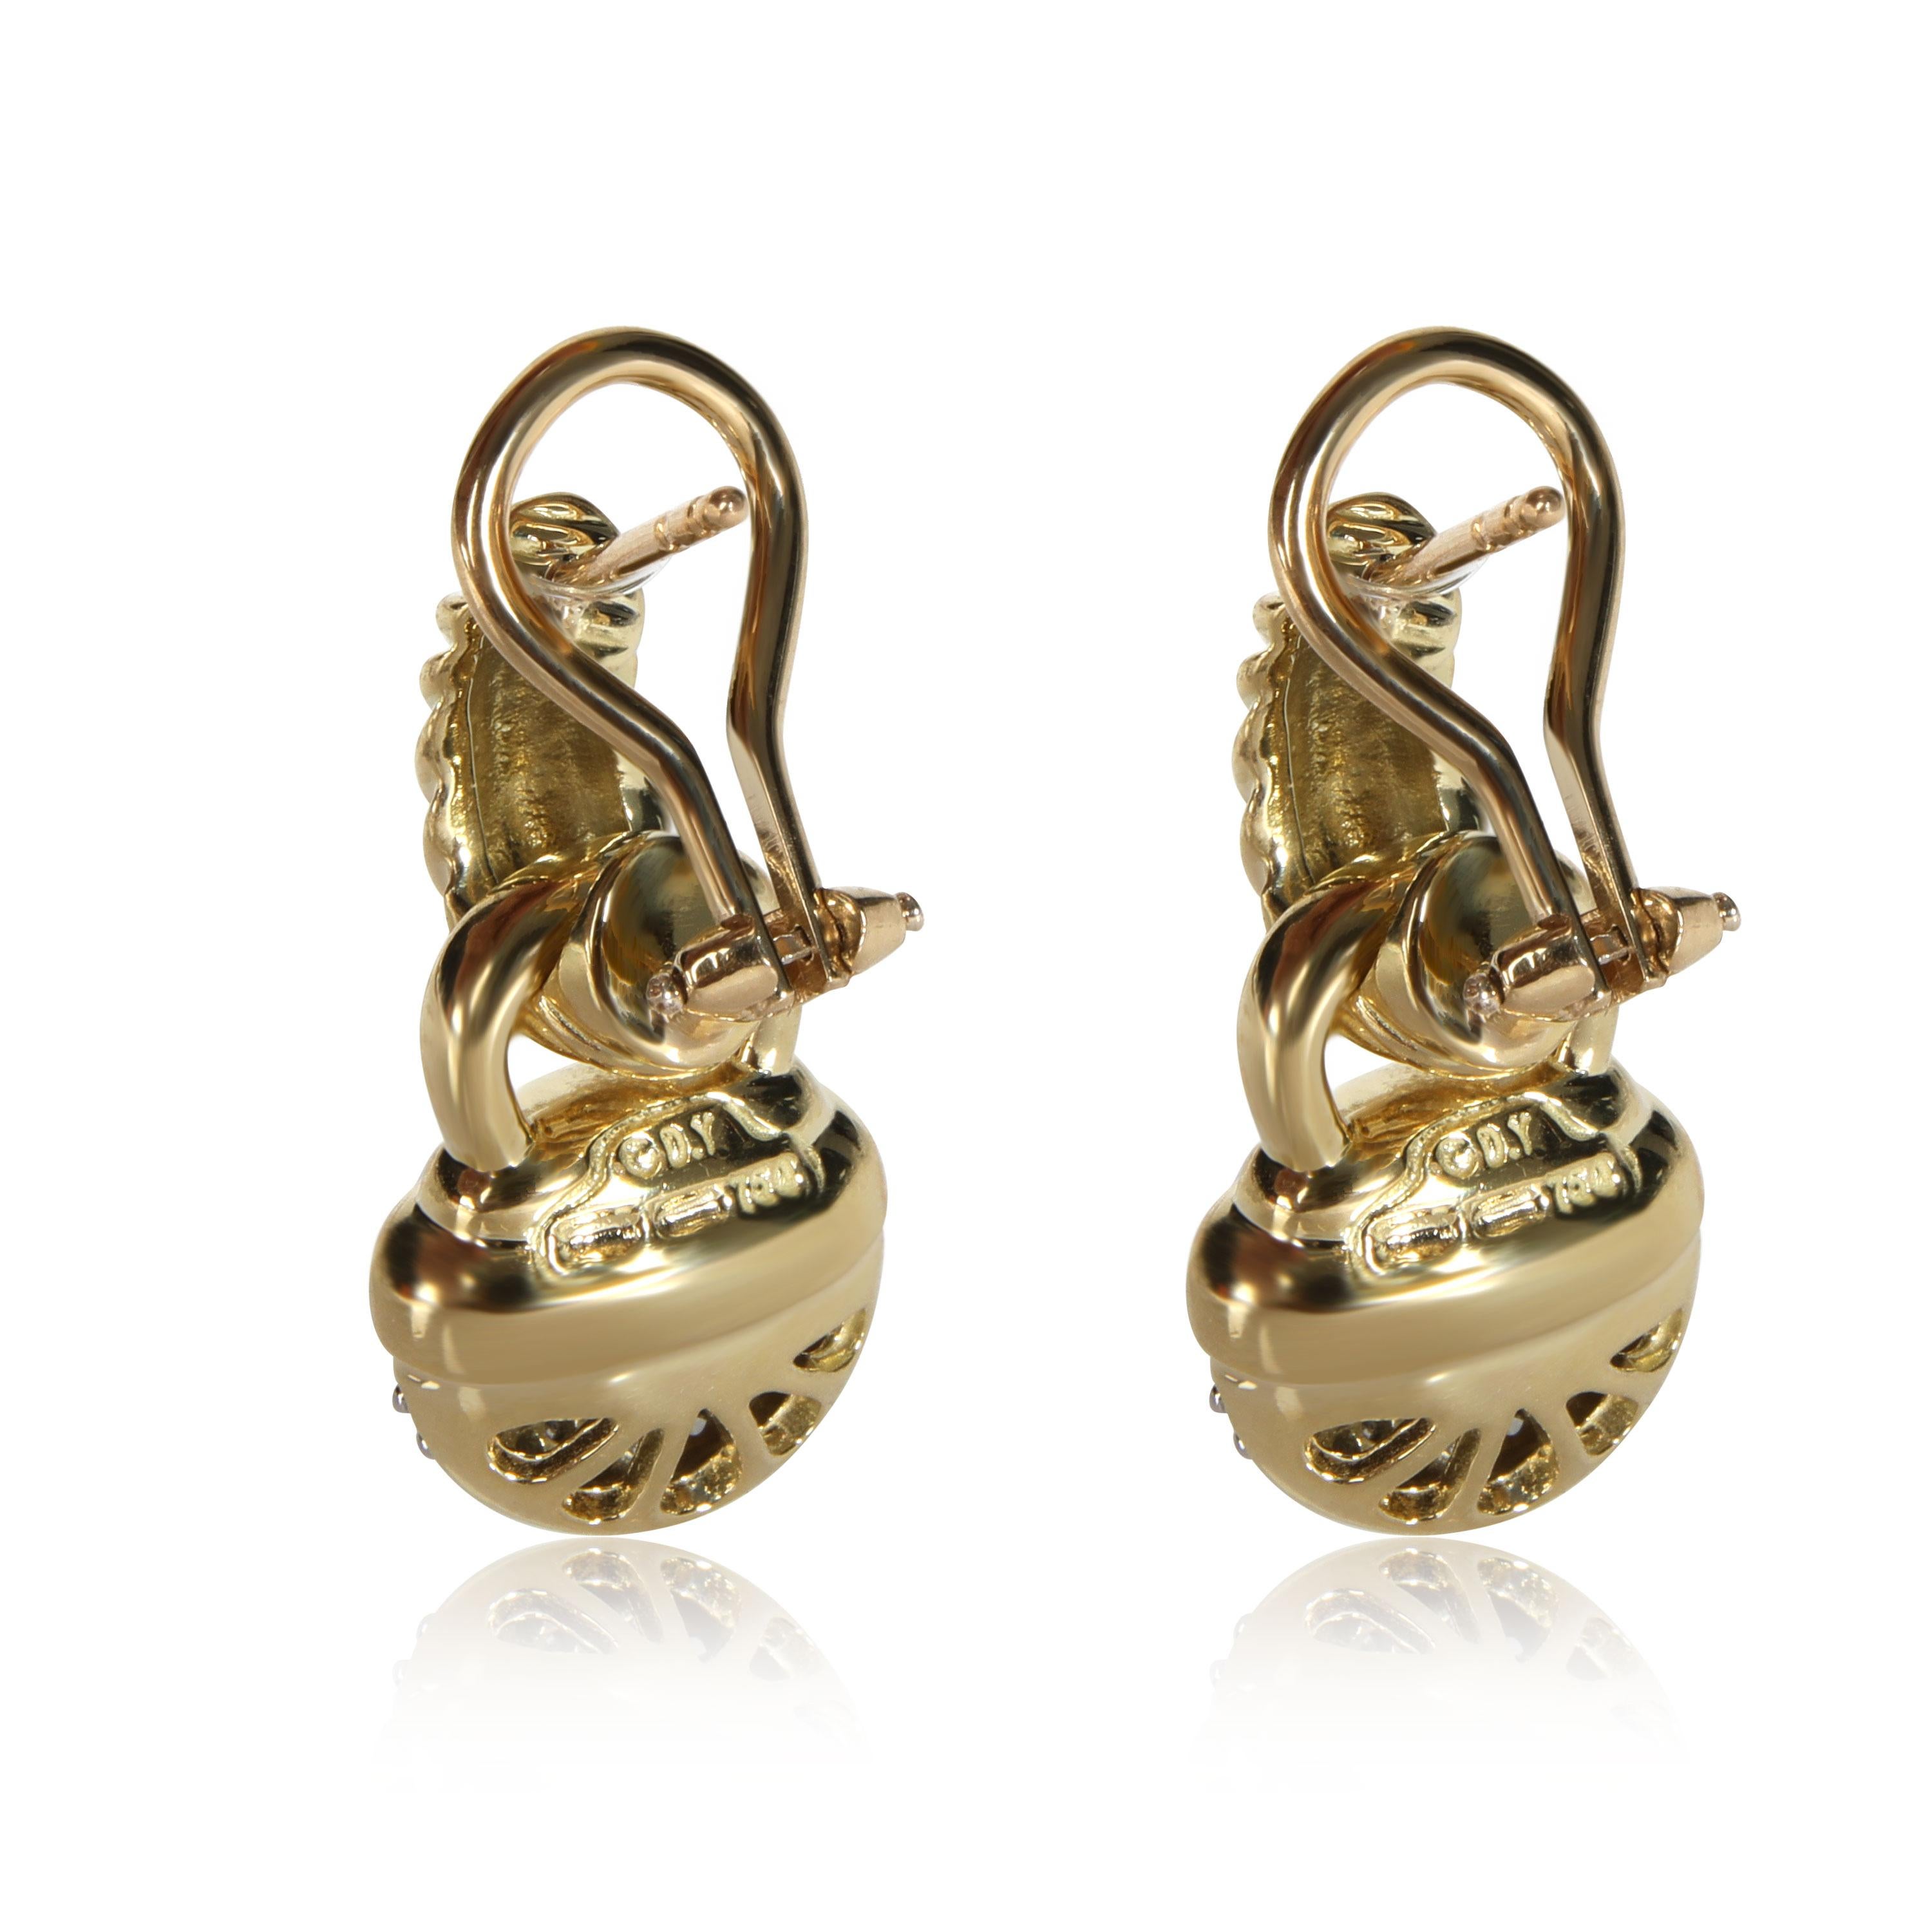 
David Yurman Cable Diamond Acorn Drop Earring in 18K Yellow Gold 0.64 CTW

PRIMARY DETAILS
SKU: 112000
Listing Title: David Yurman Cable Diamond Acorn Drop Earring in 18K Yellow Gold 0.64 CTW
Condition Description: Retails for 3200 USD. In